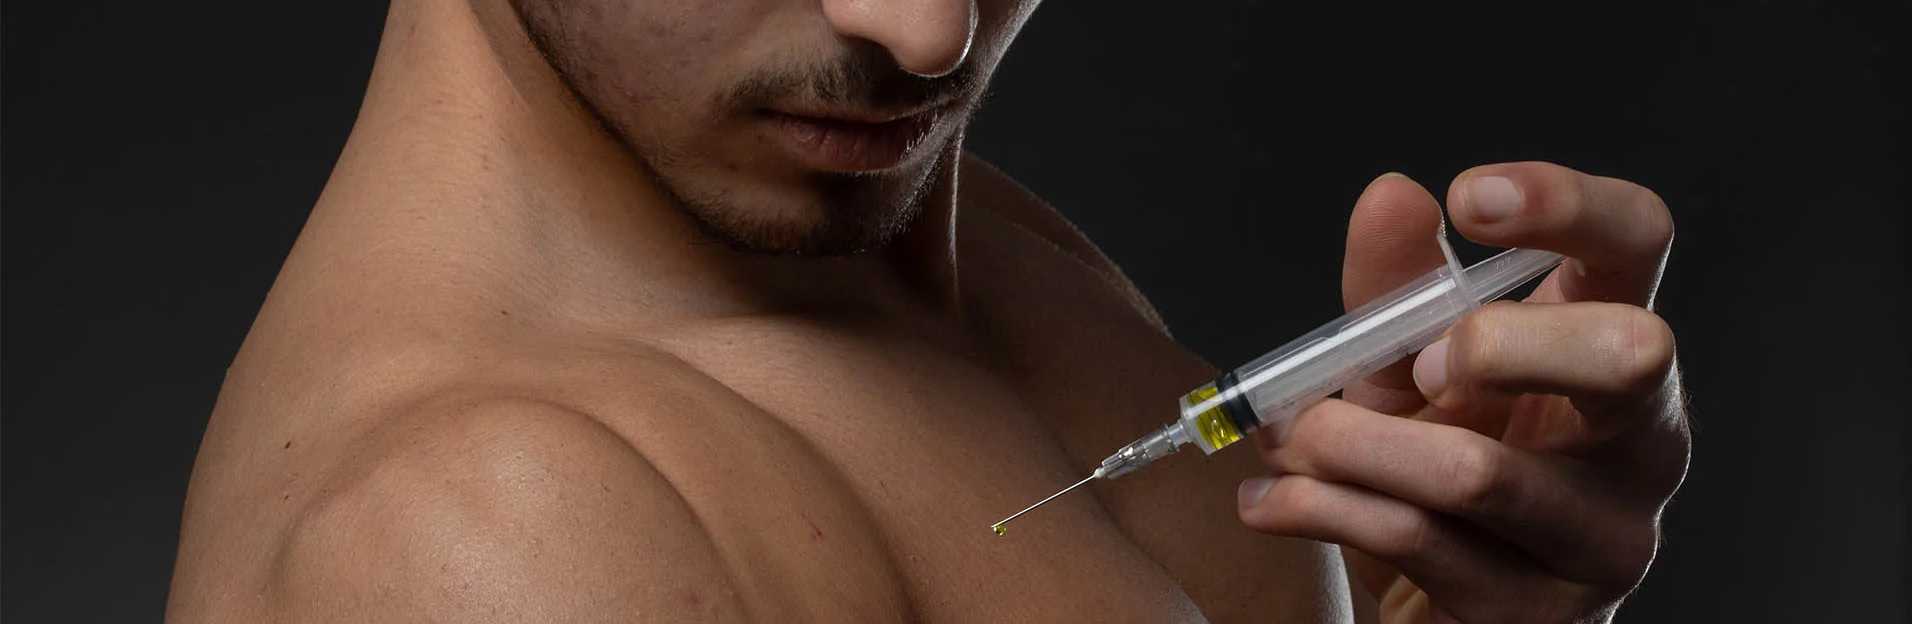 Man injecting steroids